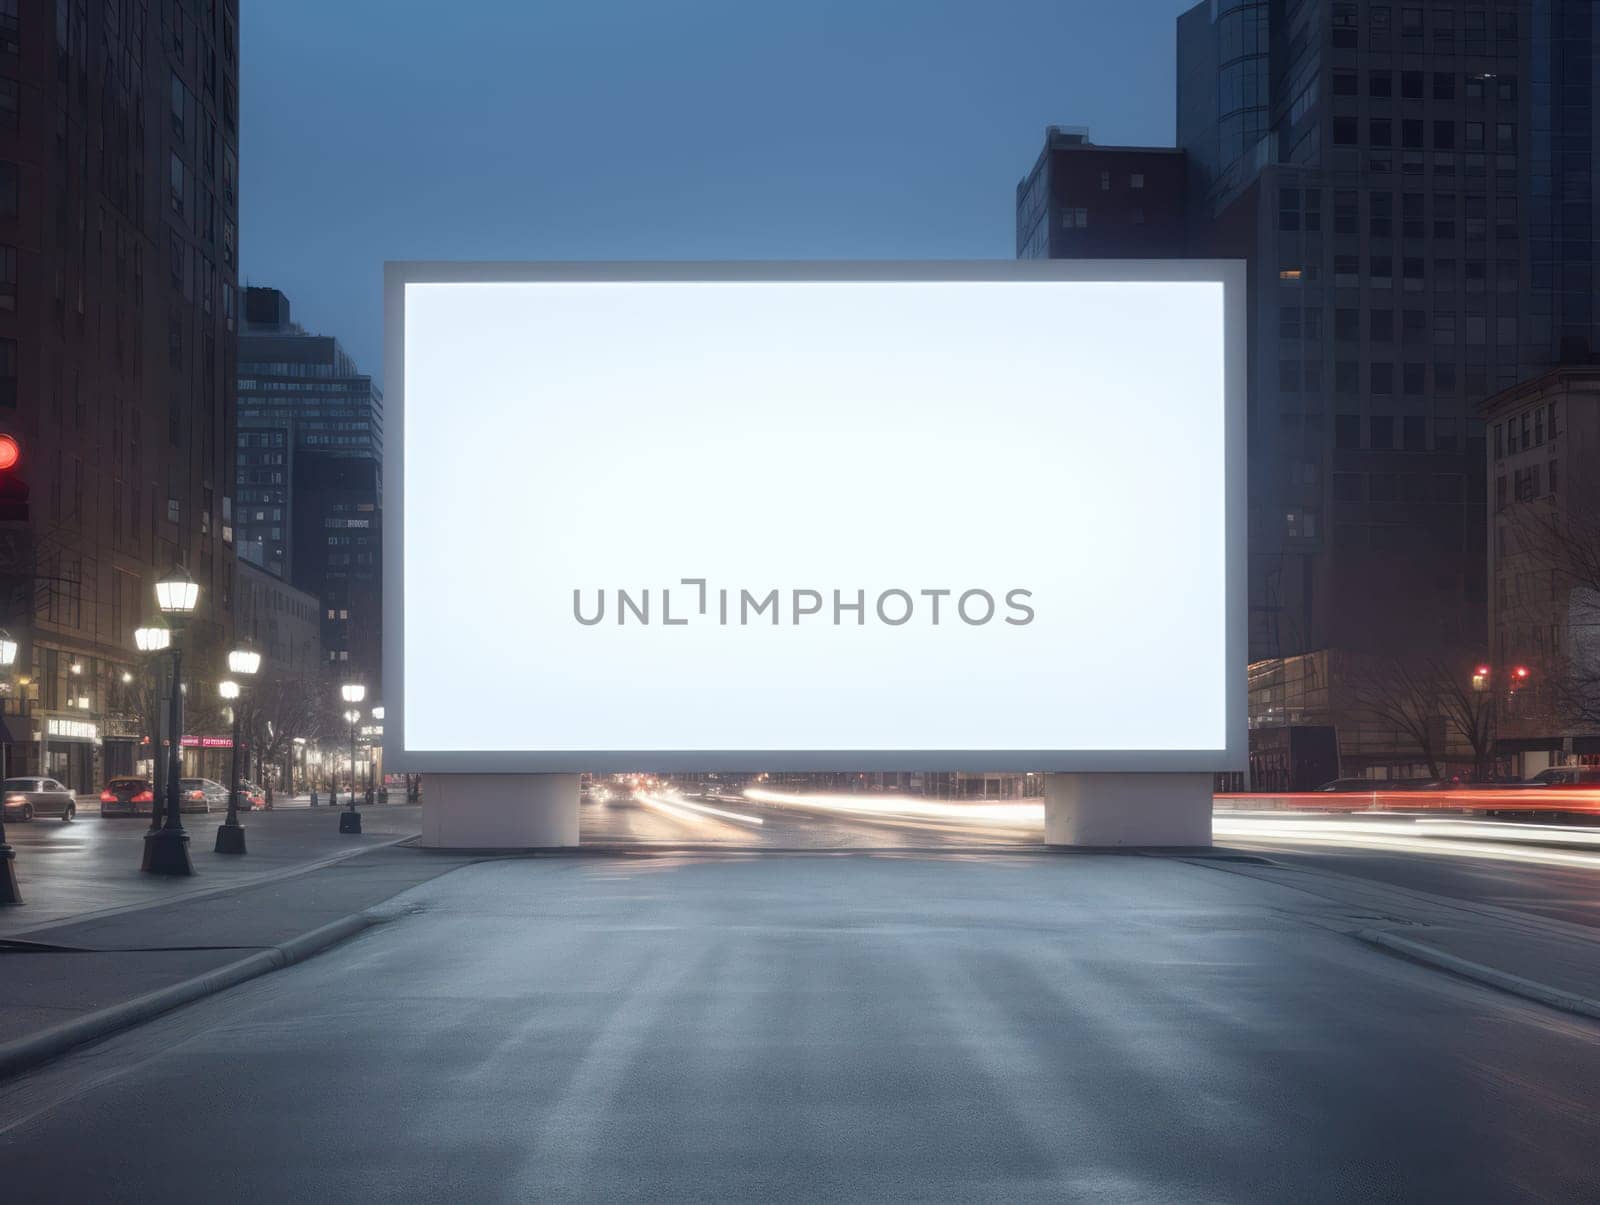 City Buzz: Illuminated Billboard Advertising Space with Blank Poster on Urban Street